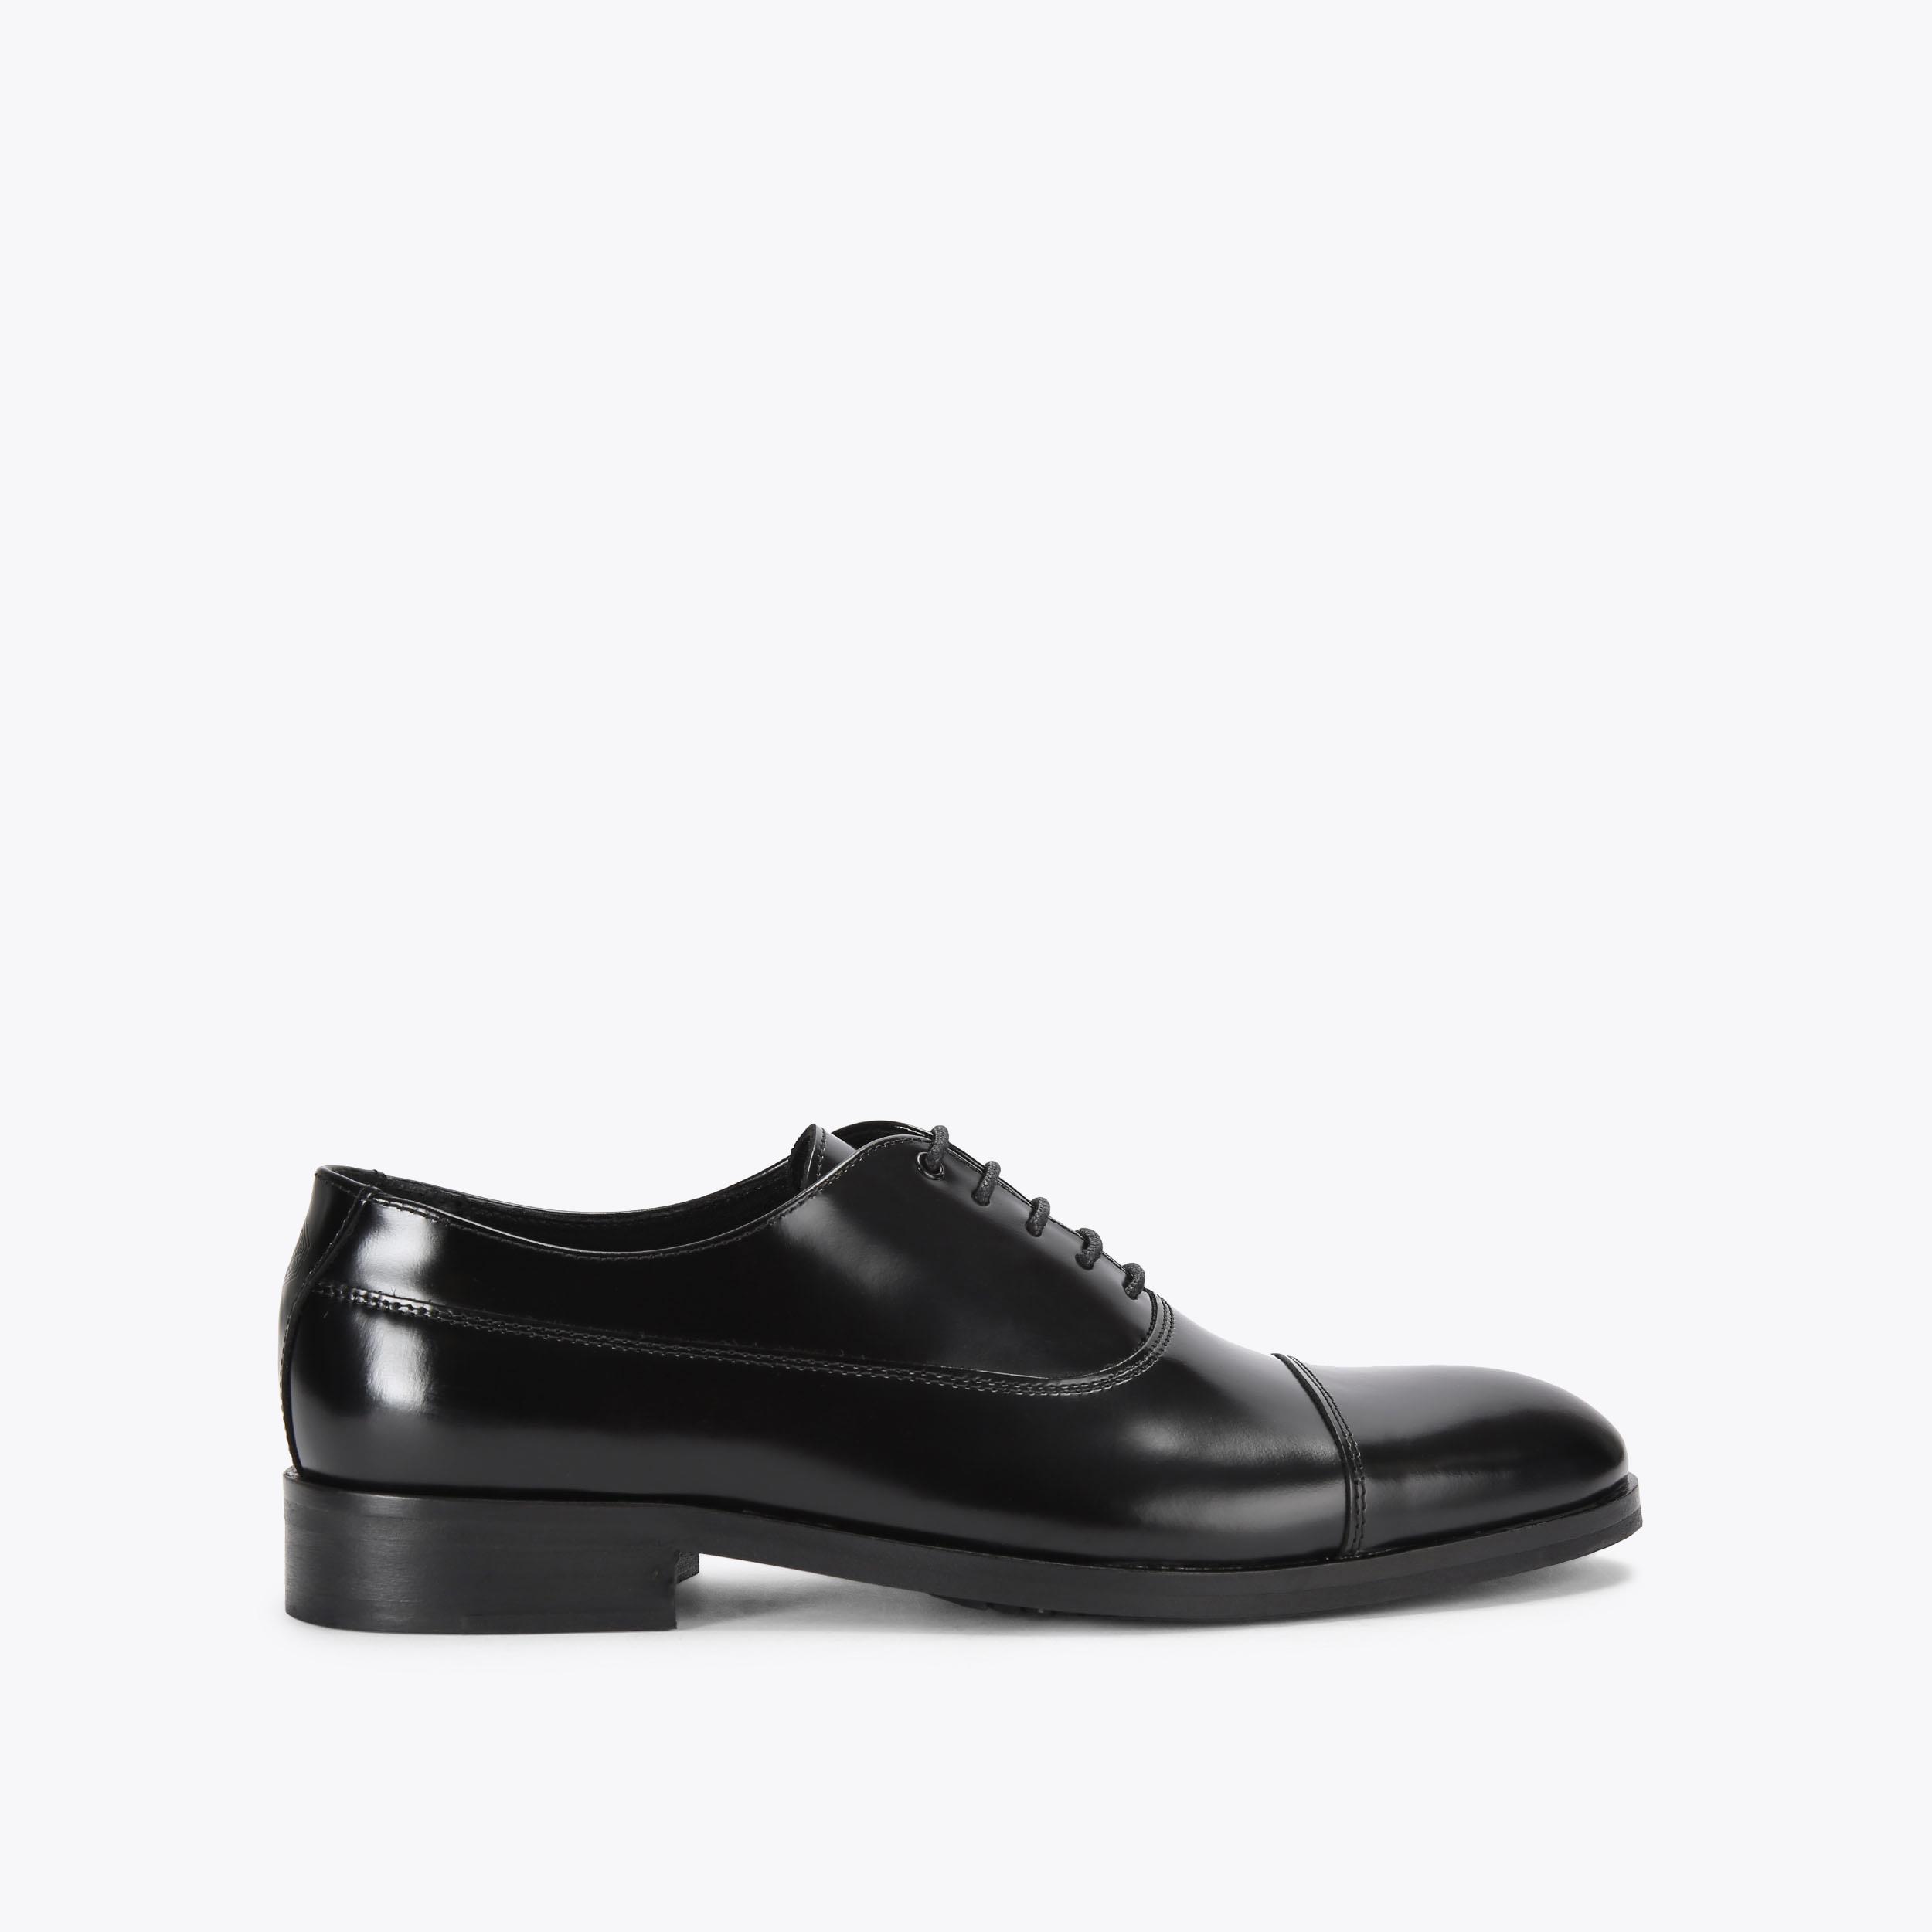 HUNTER OXFORD Black Leather Shoes by KURT GEIGER LONDON